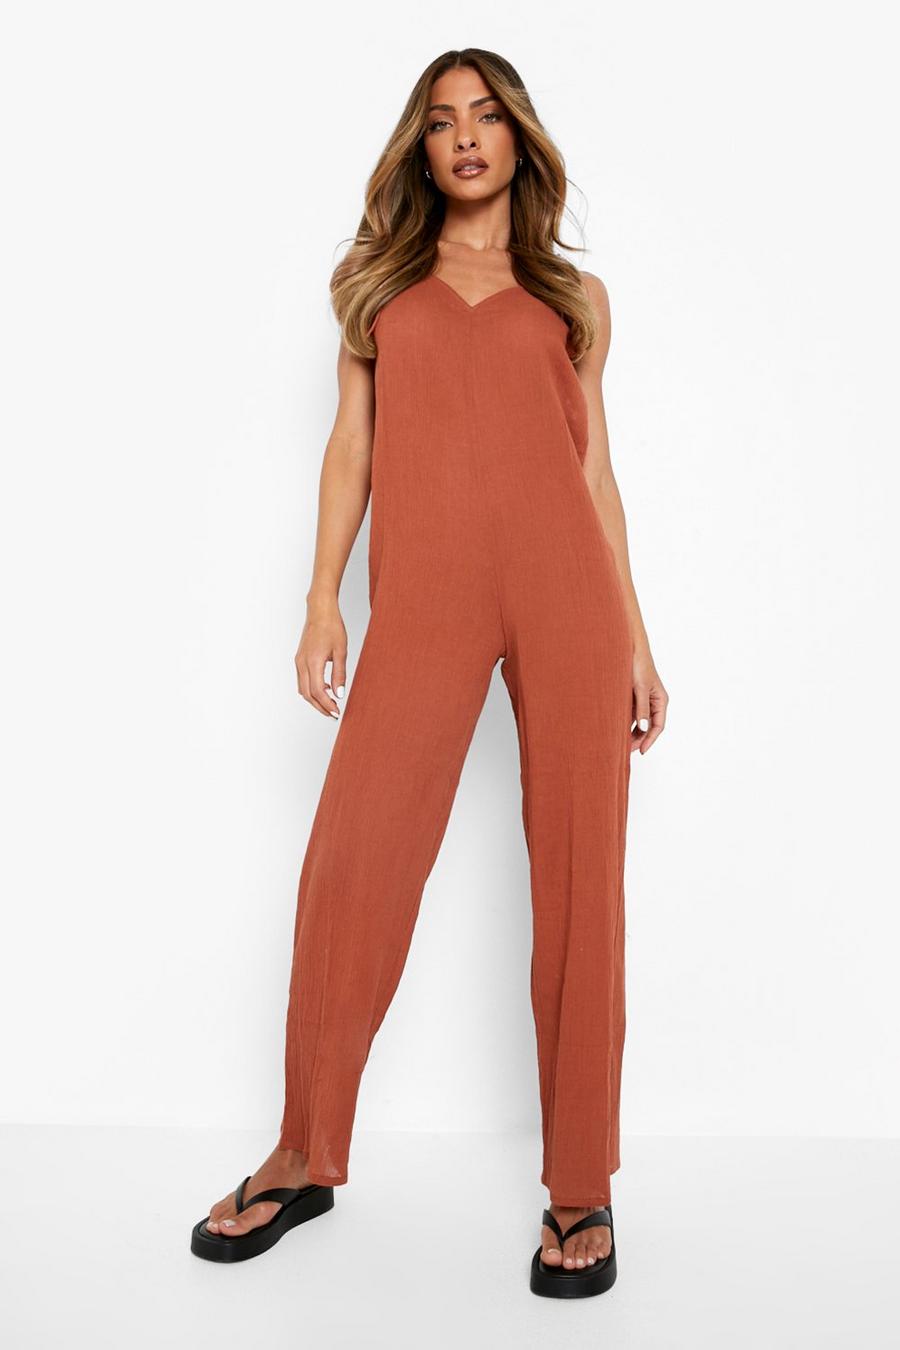 Tan brun Cheesecloth Strappy Trapeze Jumpsuit